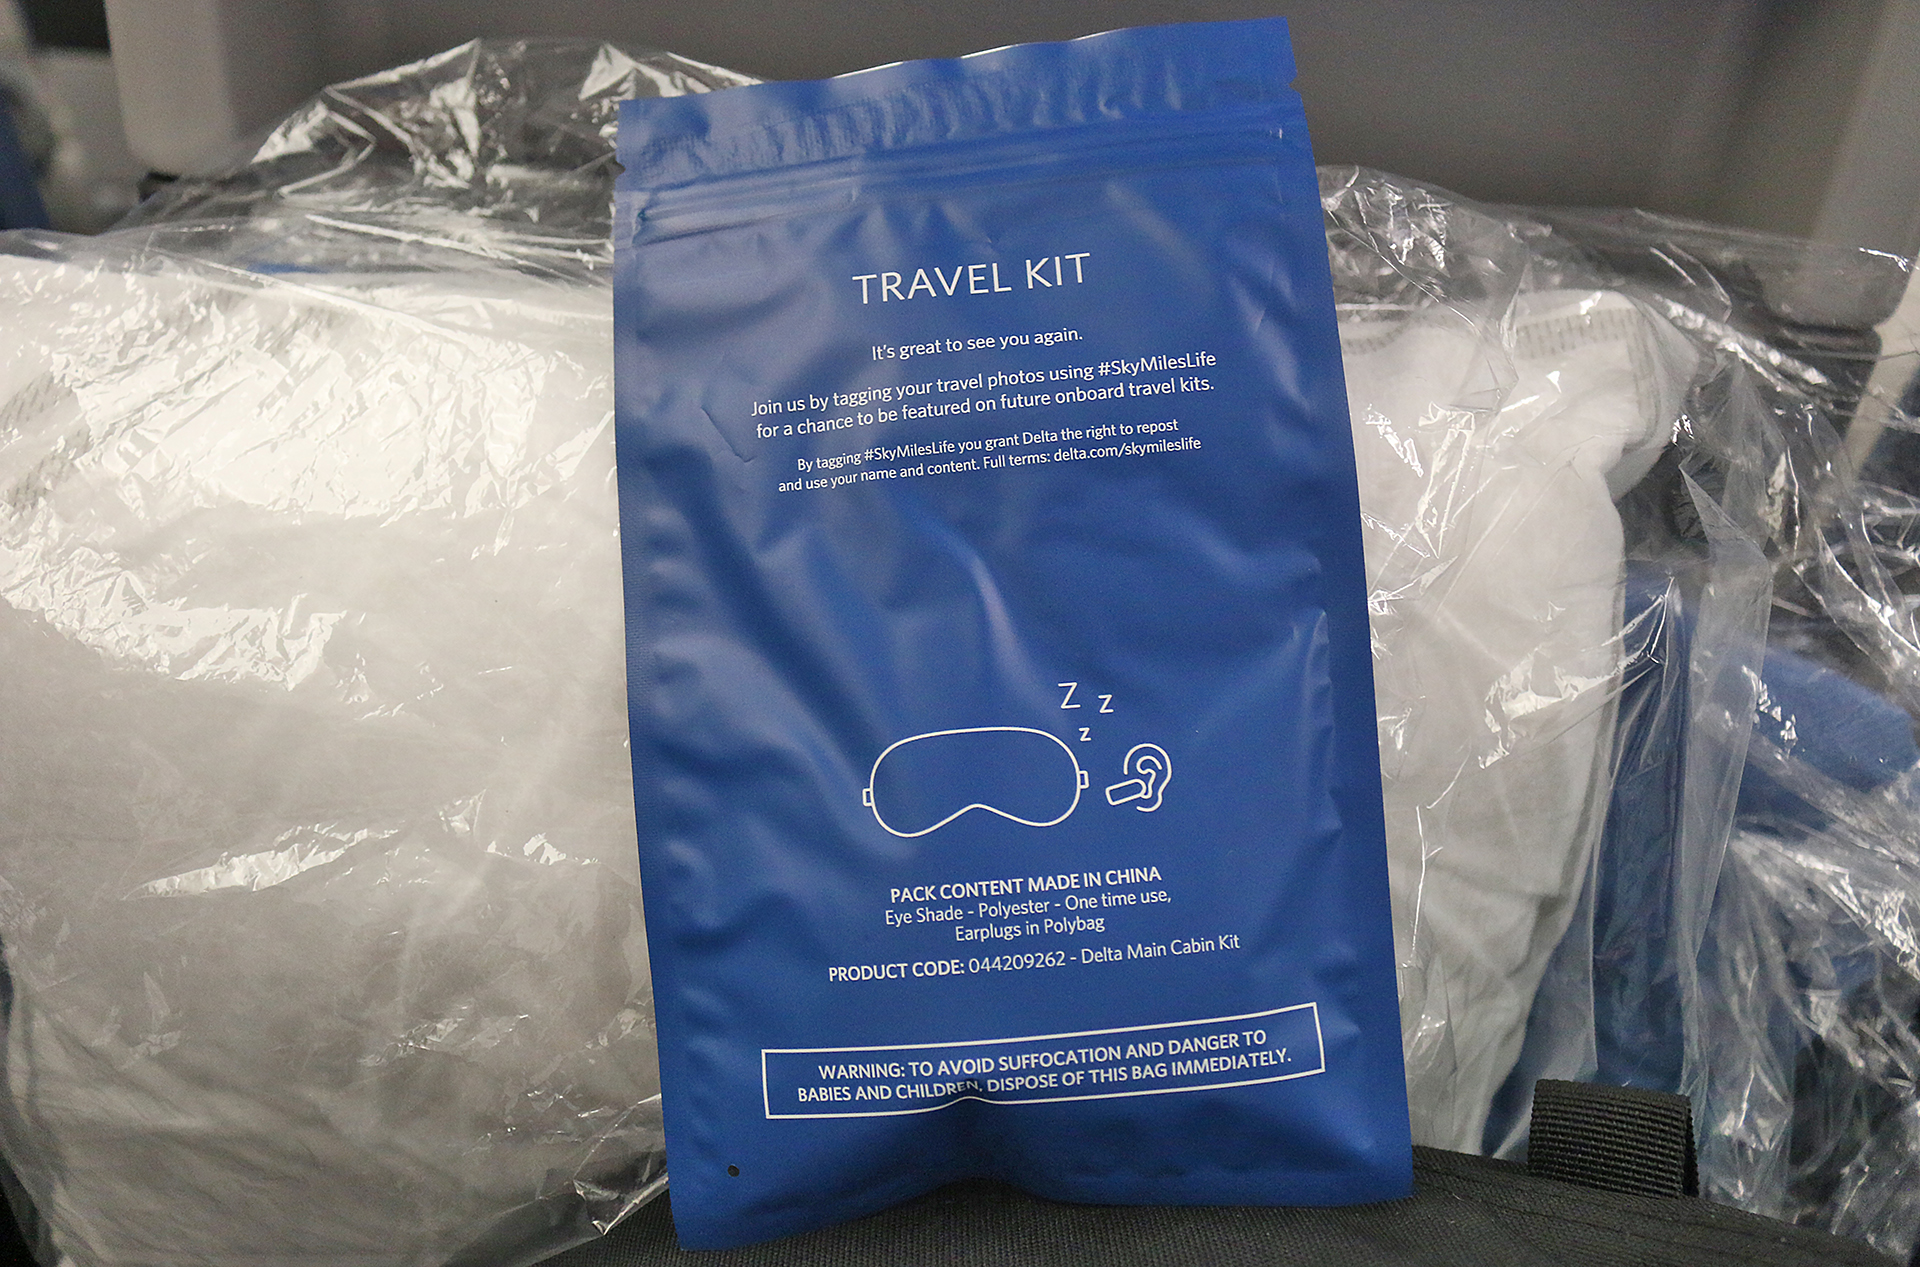 a blue bag with white text and a sleeping mask in it